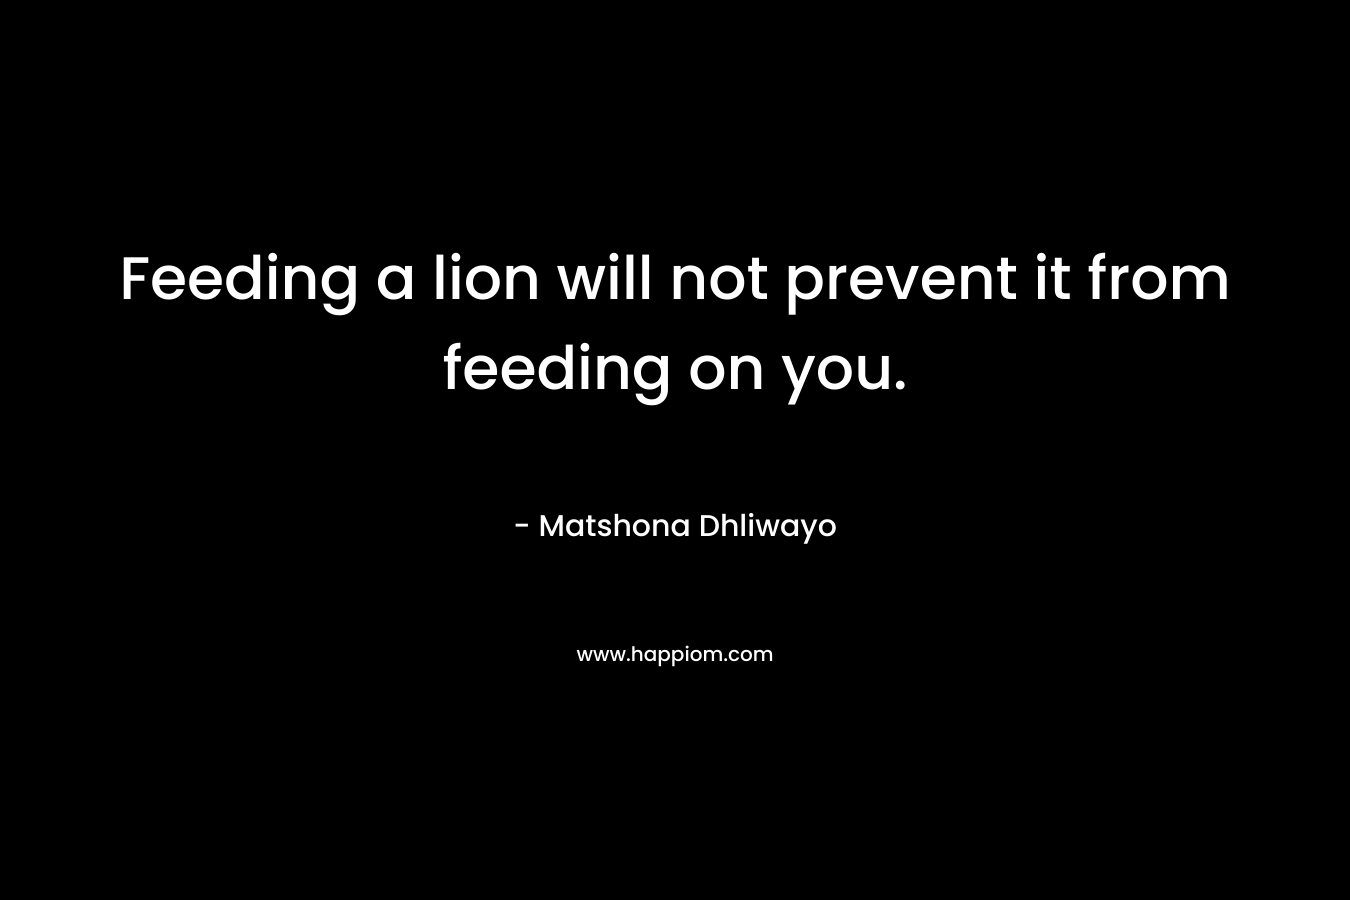 Feeding a lion will not prevent it from feeding on you. – Matshona Dhliwayo